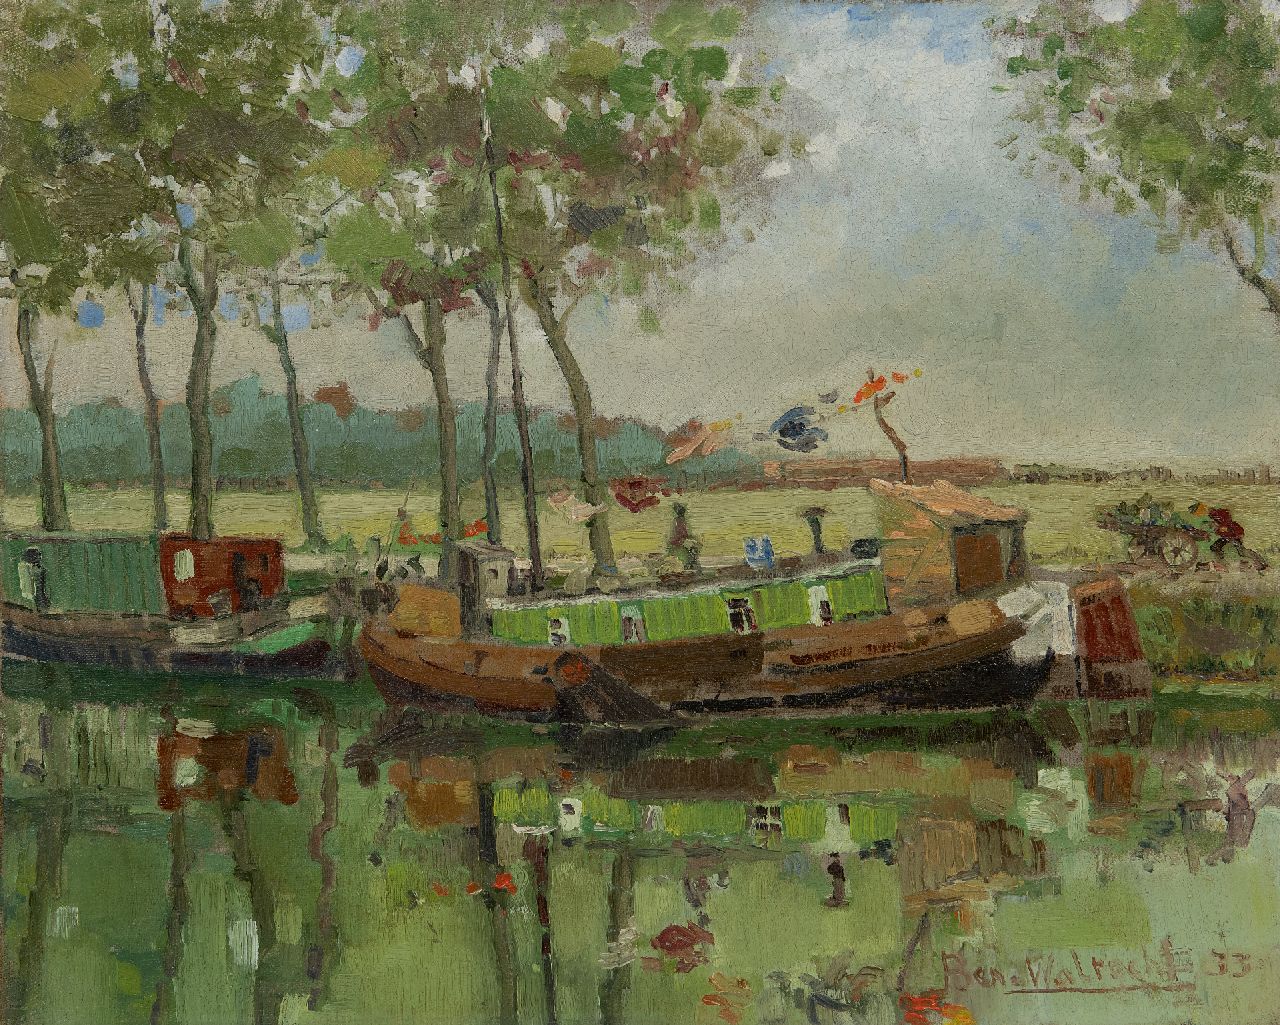 Walrecht B.H.D.  | Bernardus Hermannus David 'Ben' Walrecht | Paintings offered for sale | At Oldehove, oil on canvas laid down on panel 40.4 x 50.0 cm, signed l.r. and dated '33